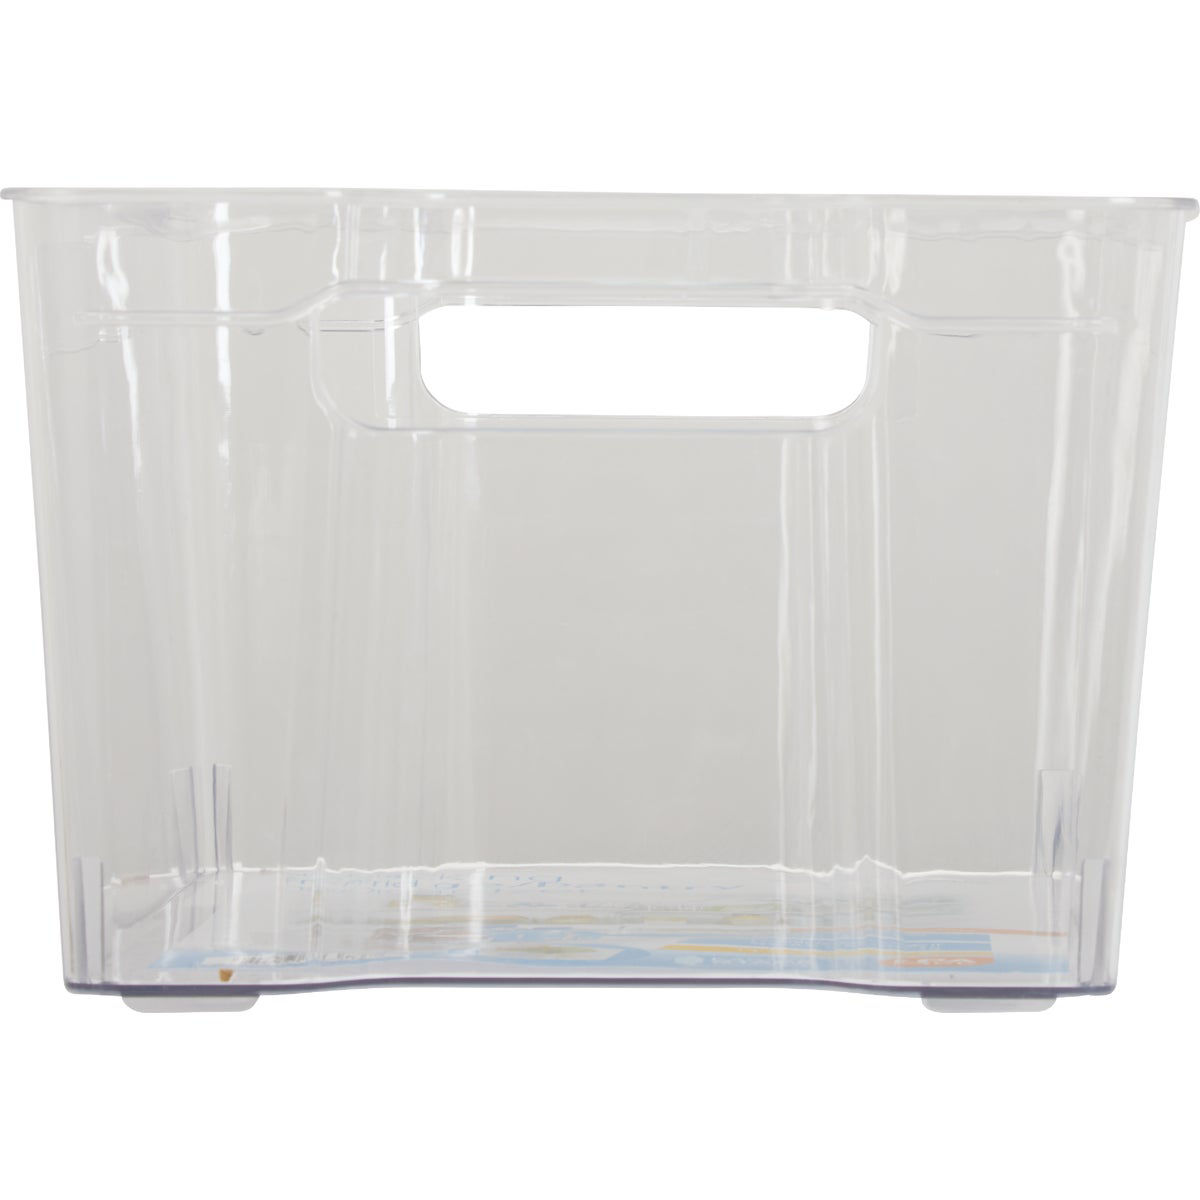 Dial Industries Clear-ly Organized 8.5 In. W. x 5.75 In. H. x